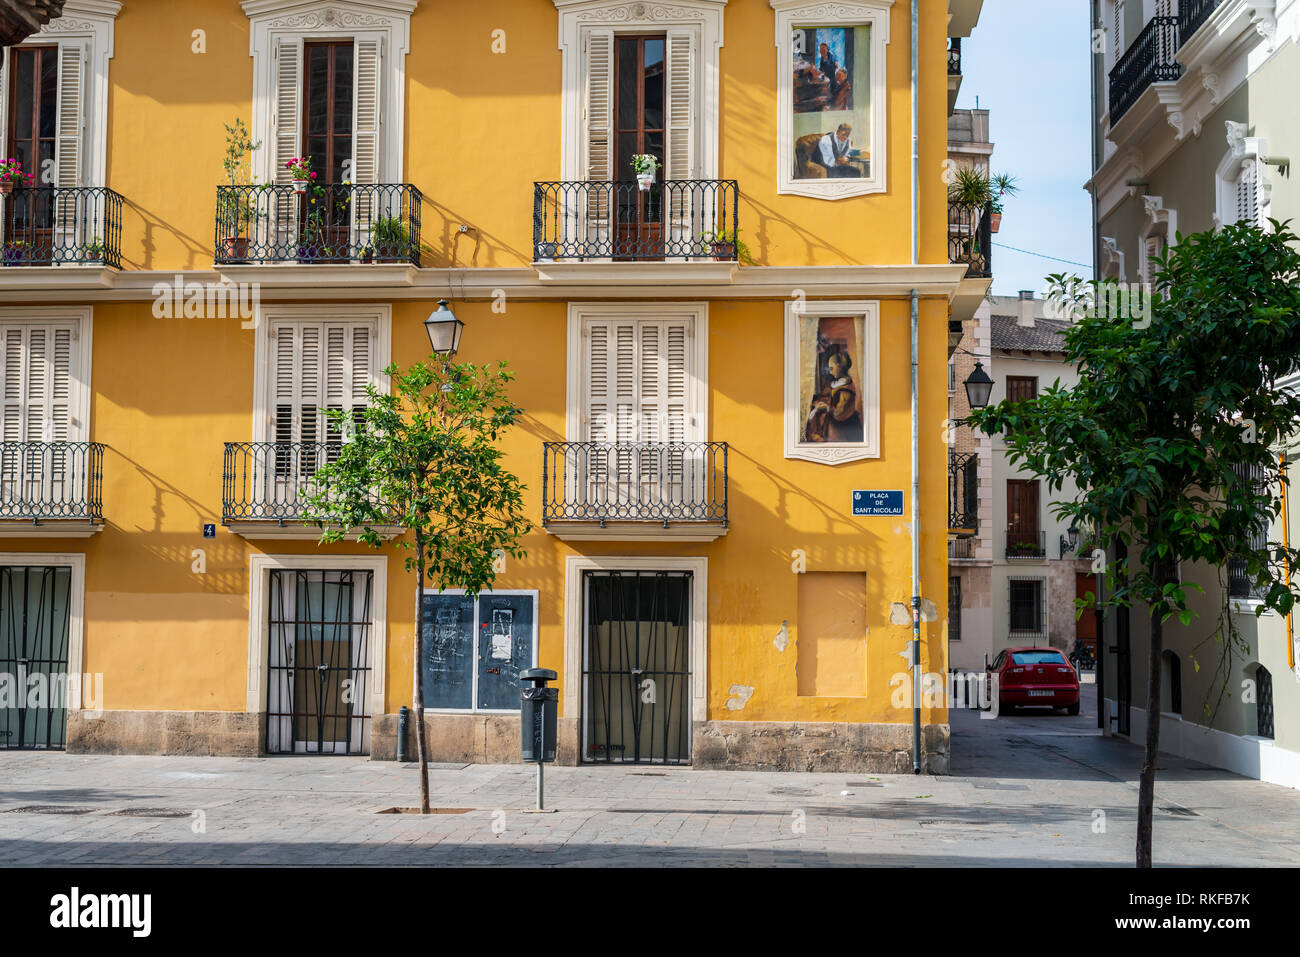 A brightly coloured building in the Old Town of Valencia, Spain. Stock Photo